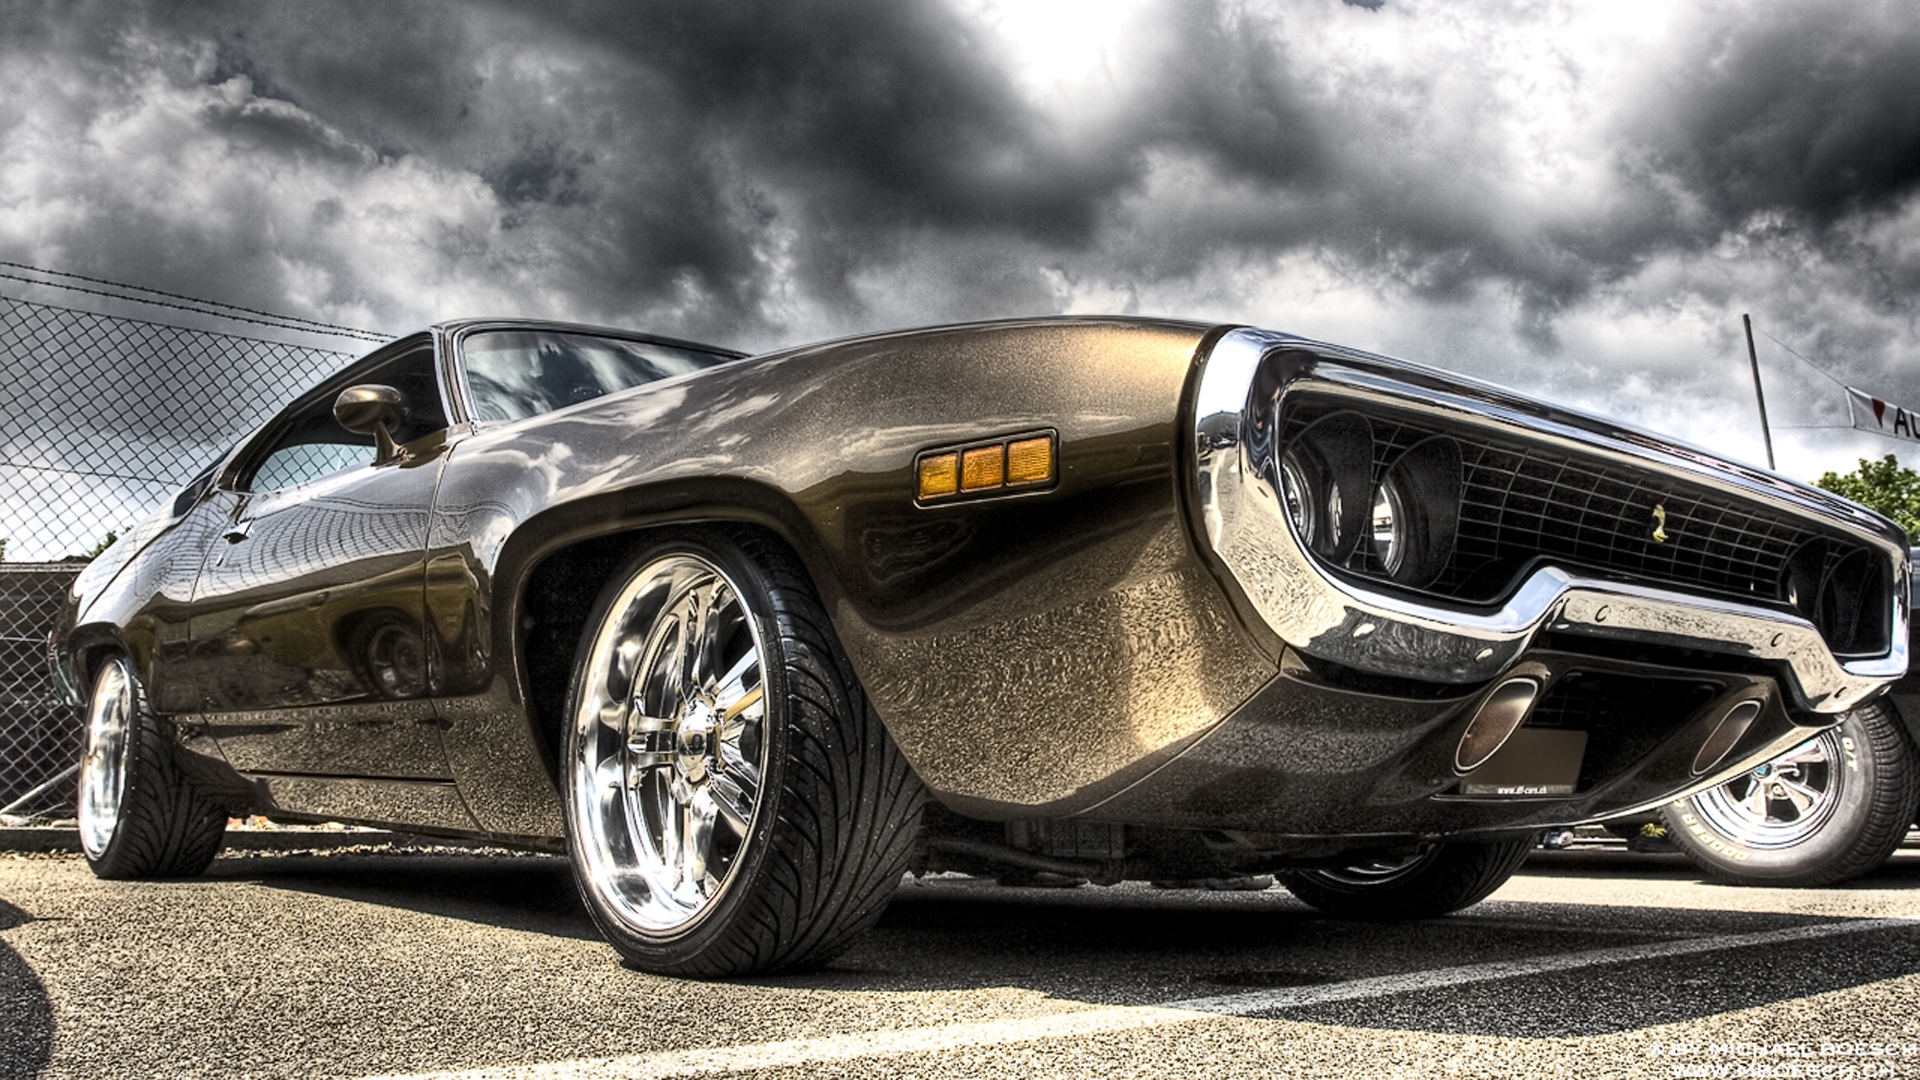 14+ Hd Muscle Car Wallpapers 1080p Pack Download free download